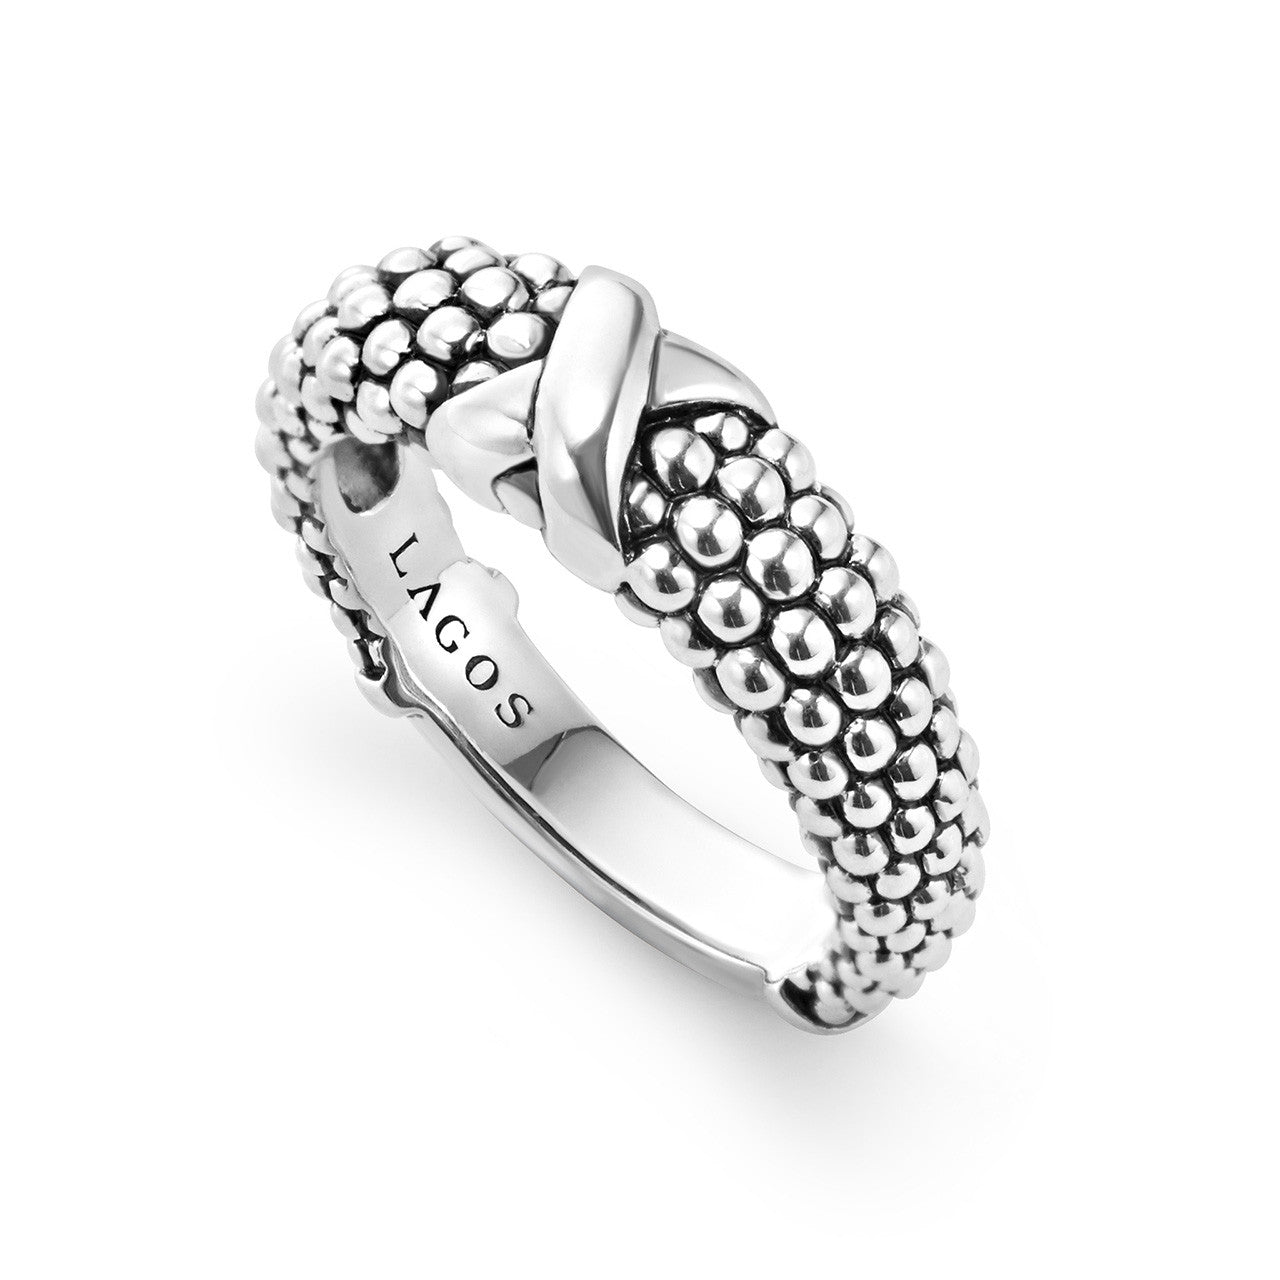 Stackable Silver Ring - Sterling Silver Rings